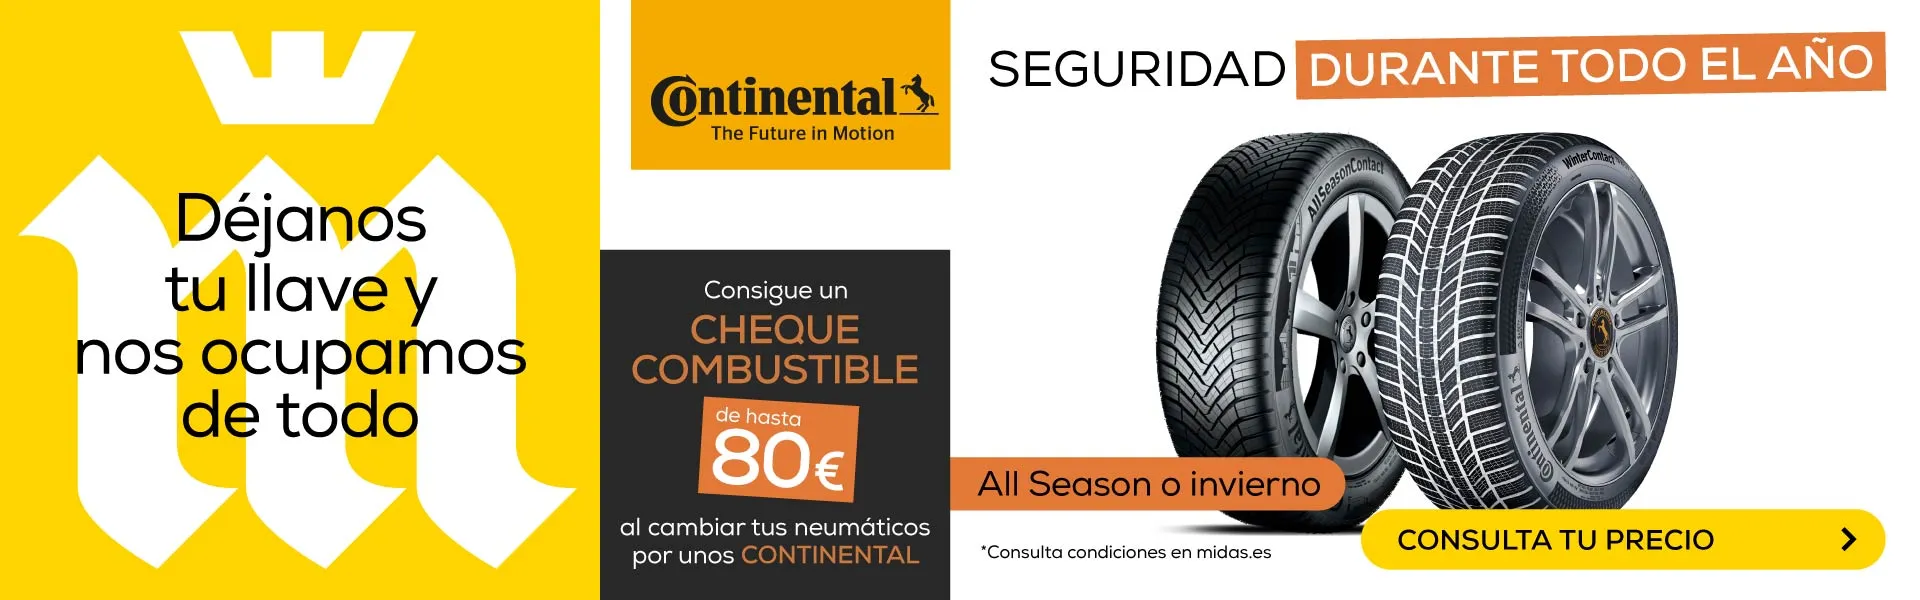 banner_continental_cheque_combustible_midas